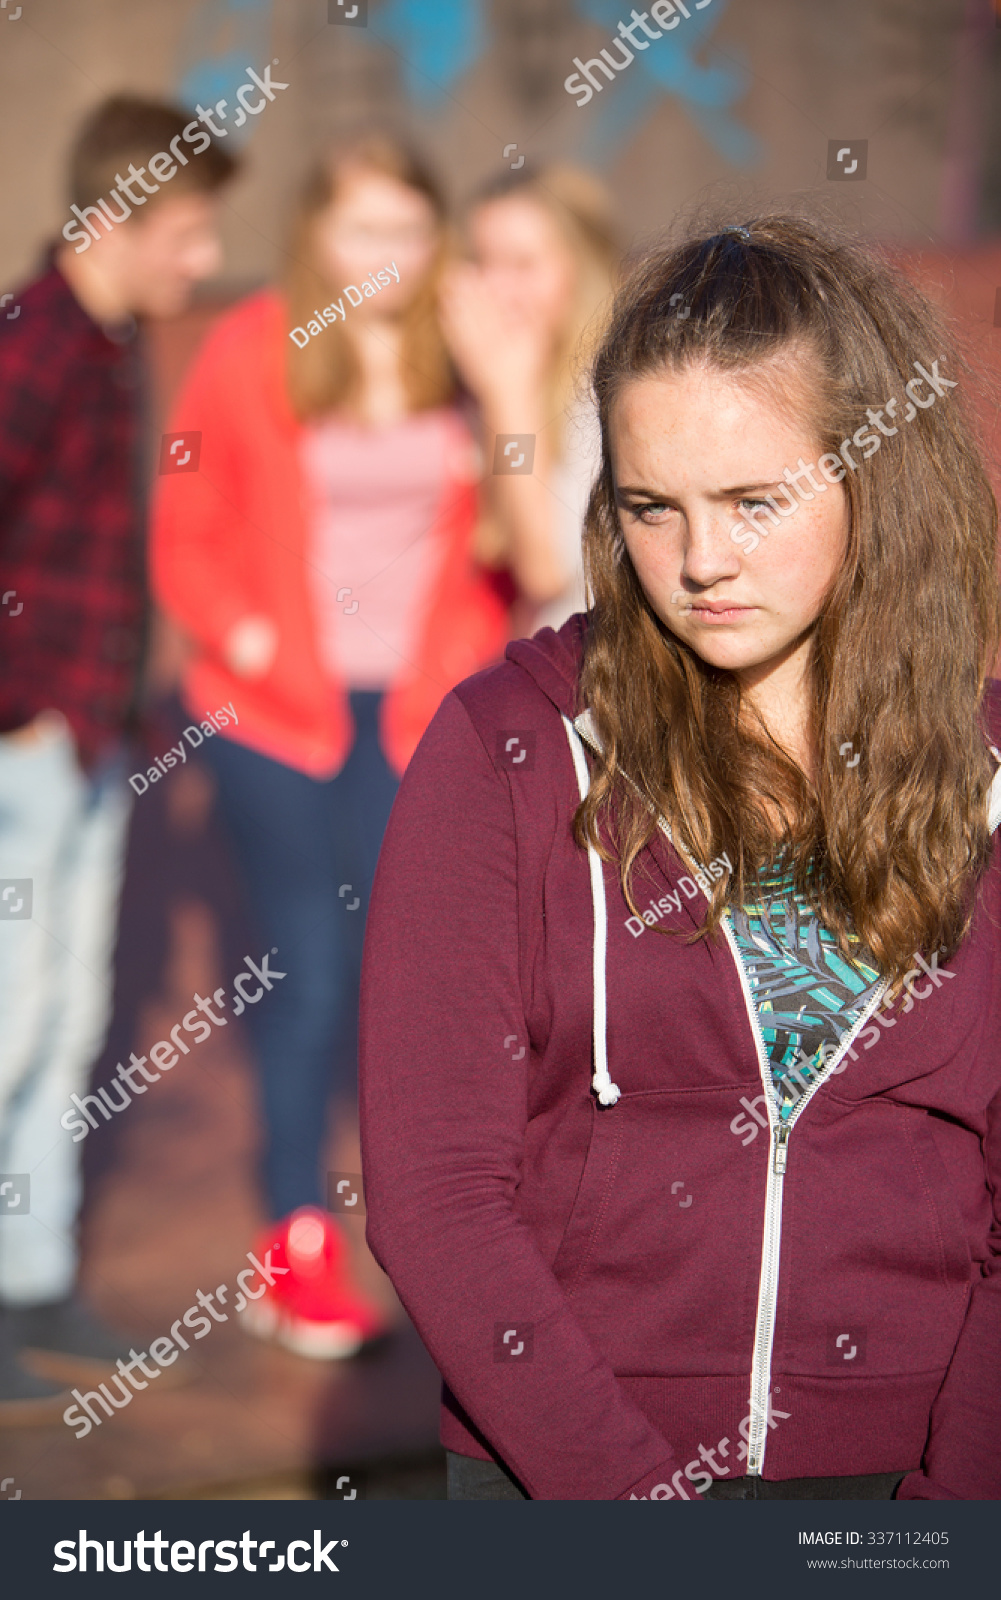 Unhappy Teenage Girl Being Gossiped About Stock Photo 337112405 ...